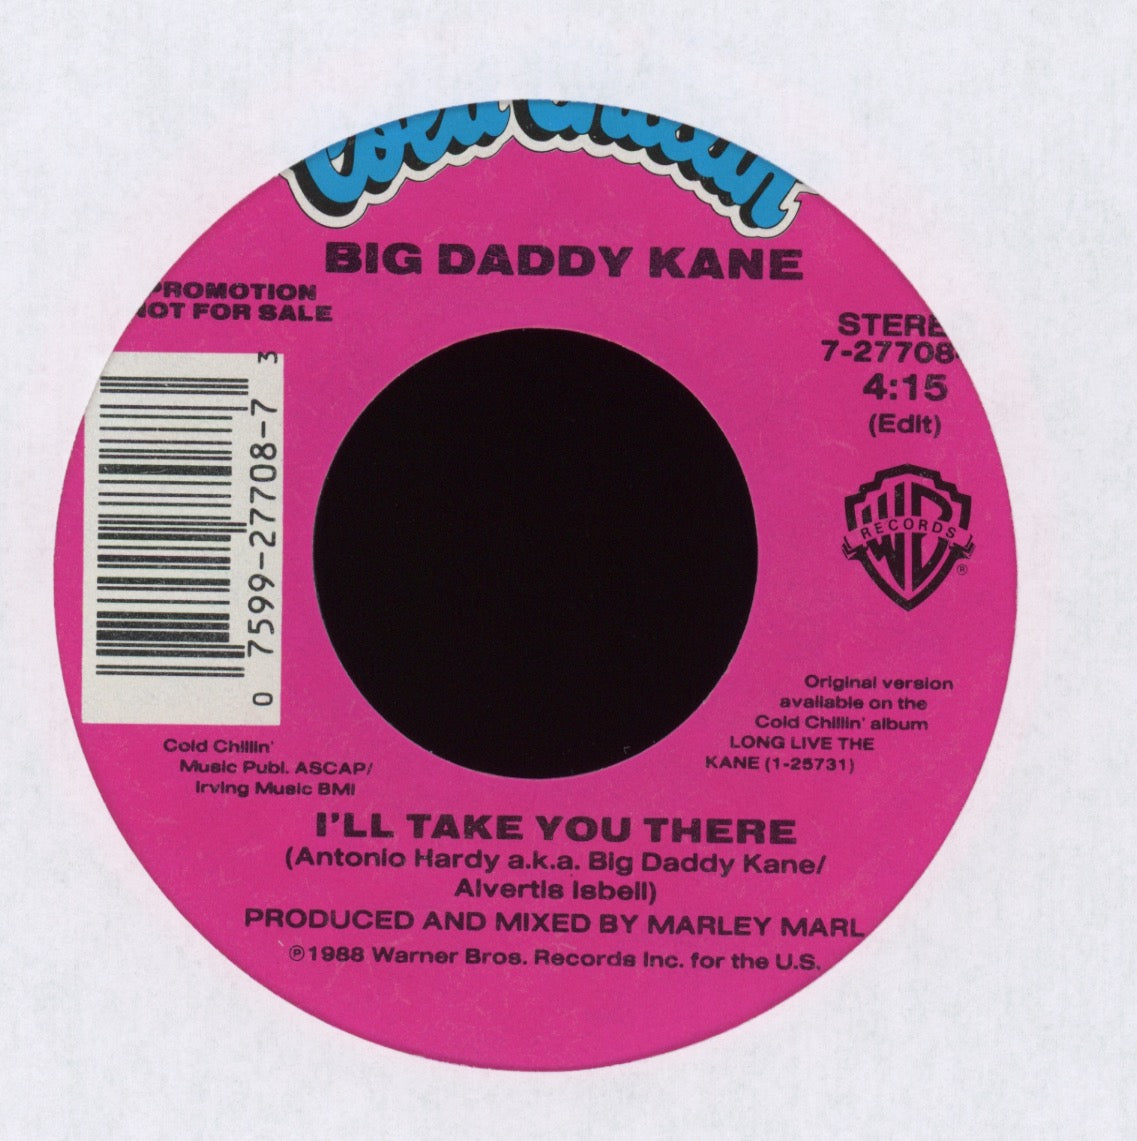 Big Daddy Kane - I'll Take You There on Cold Chillin' Promo